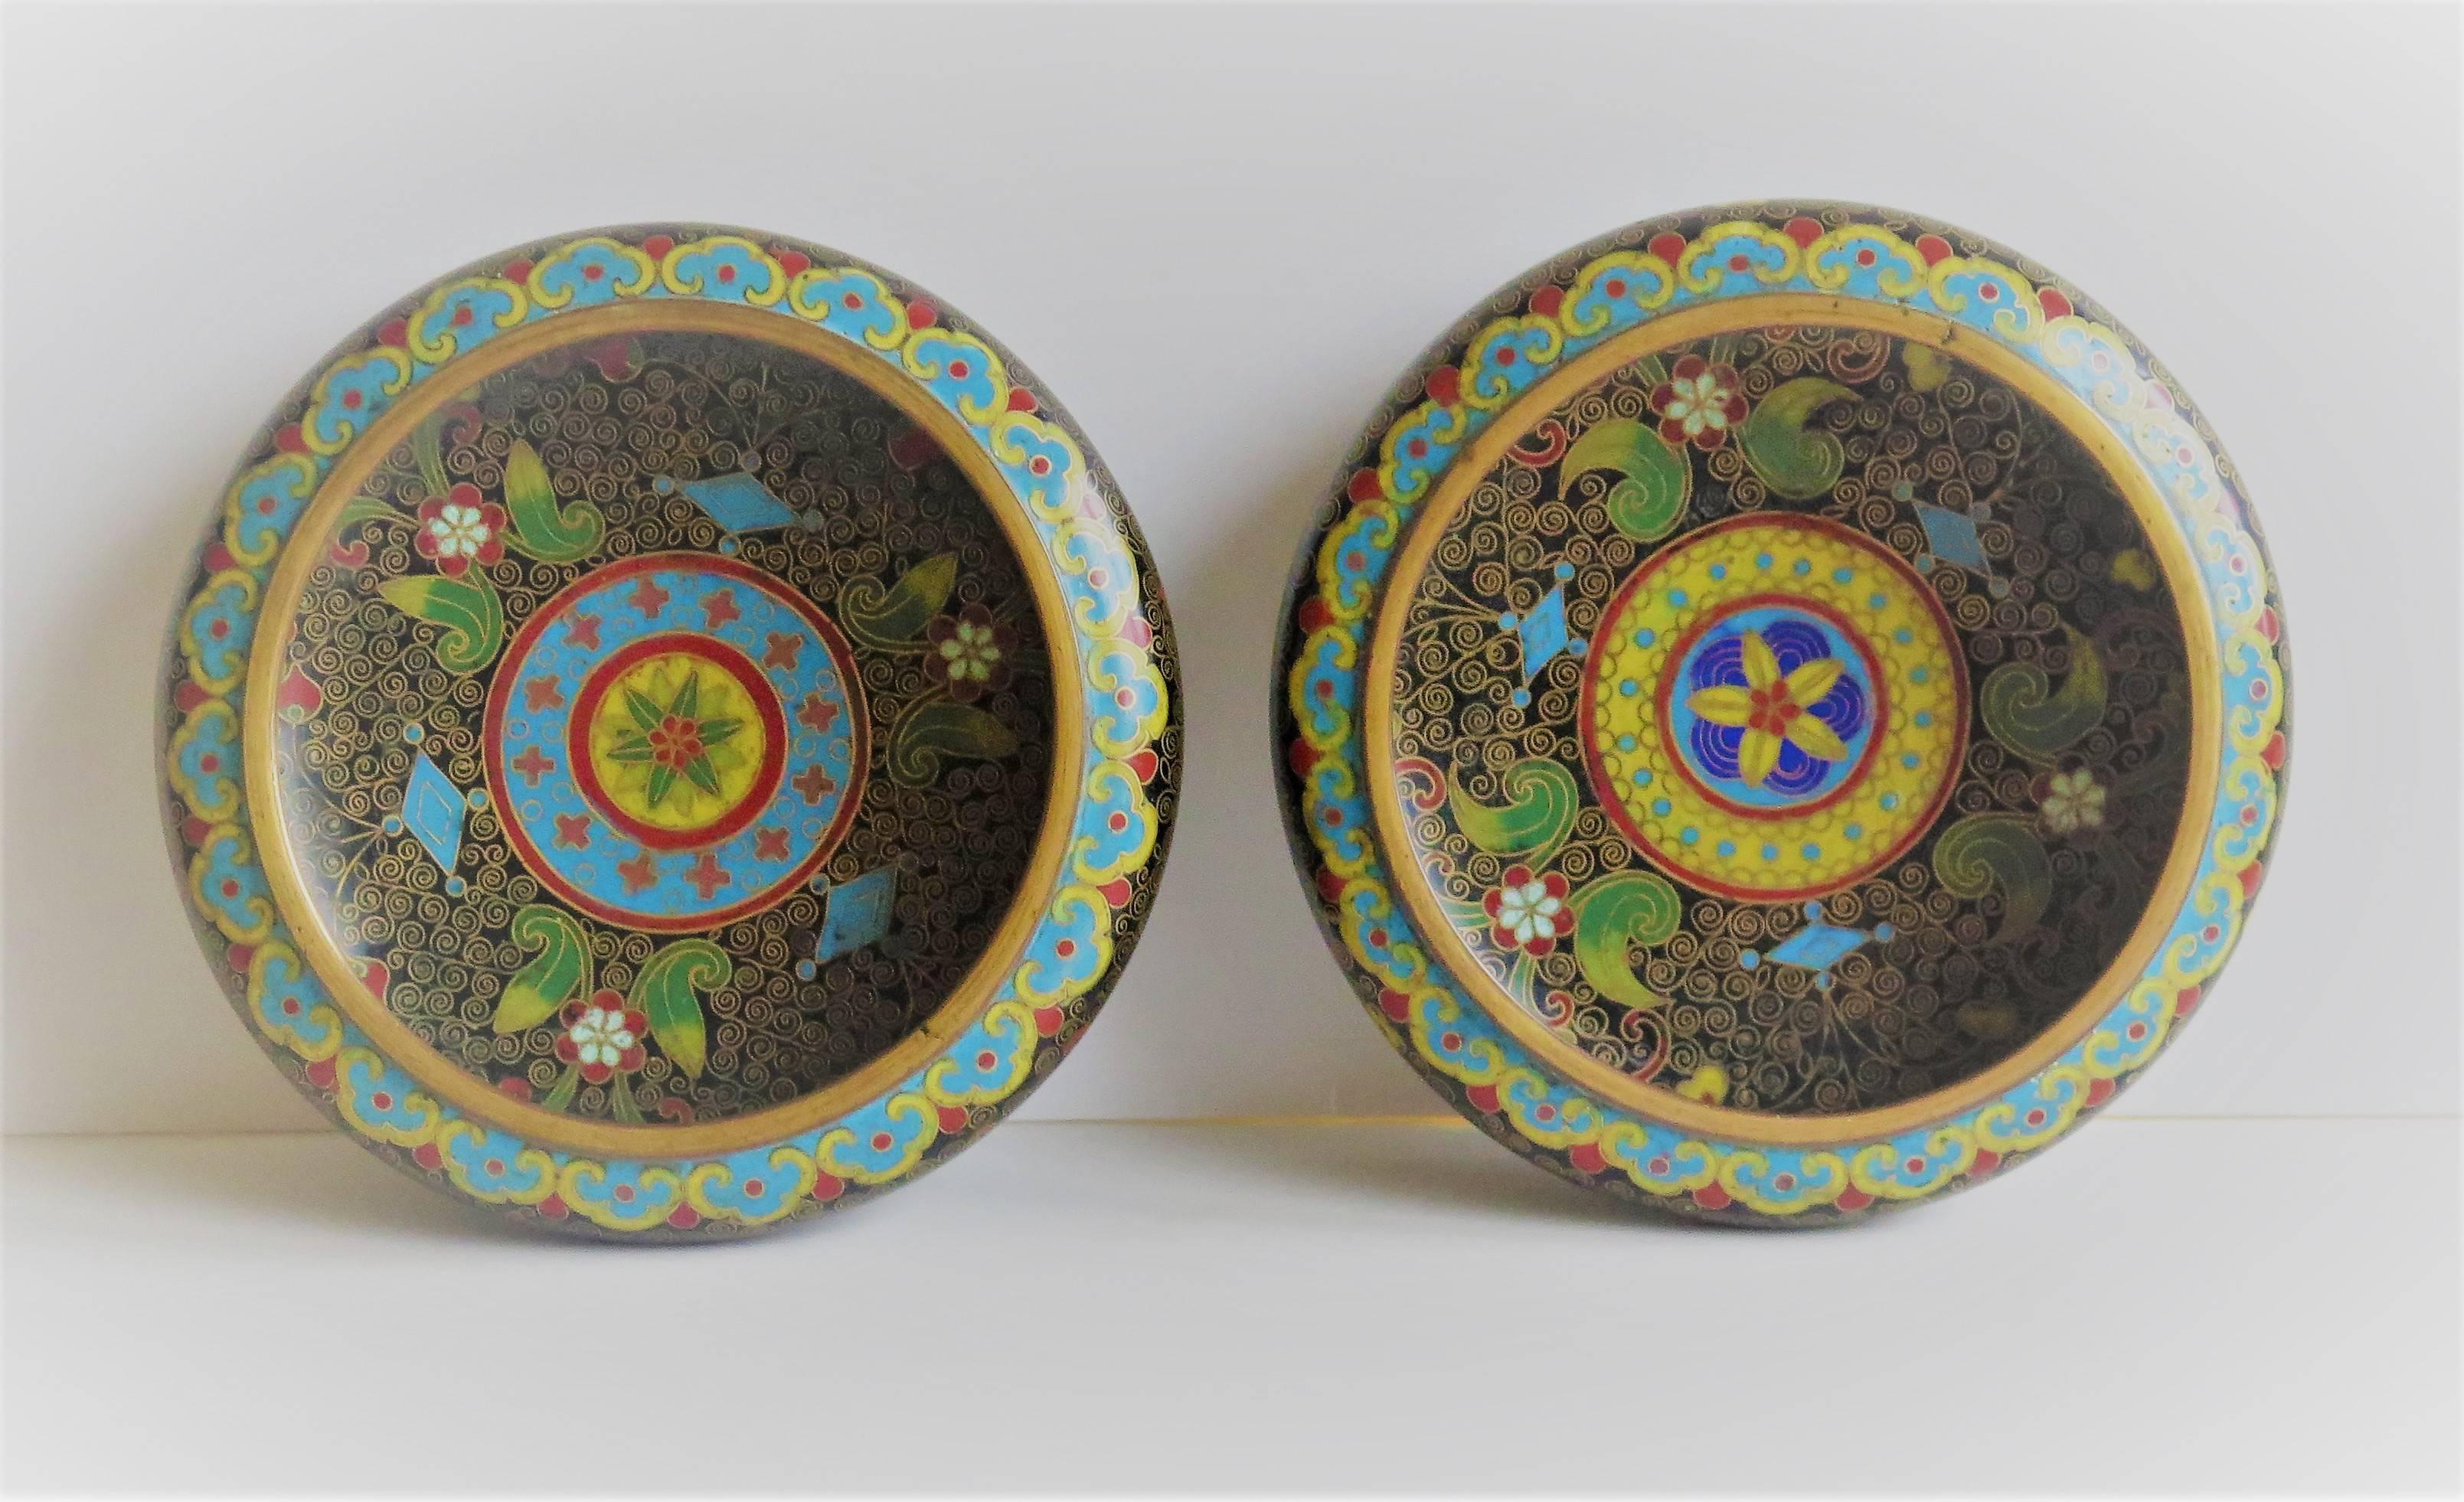 These are a good PAIR of shallow cloisonne bowls made in China in the mid-19th century.

Each bowl is circular with a short foot. They are beautifully made of bronze with rich colorful enamels in different but very similar designs.

The decoration